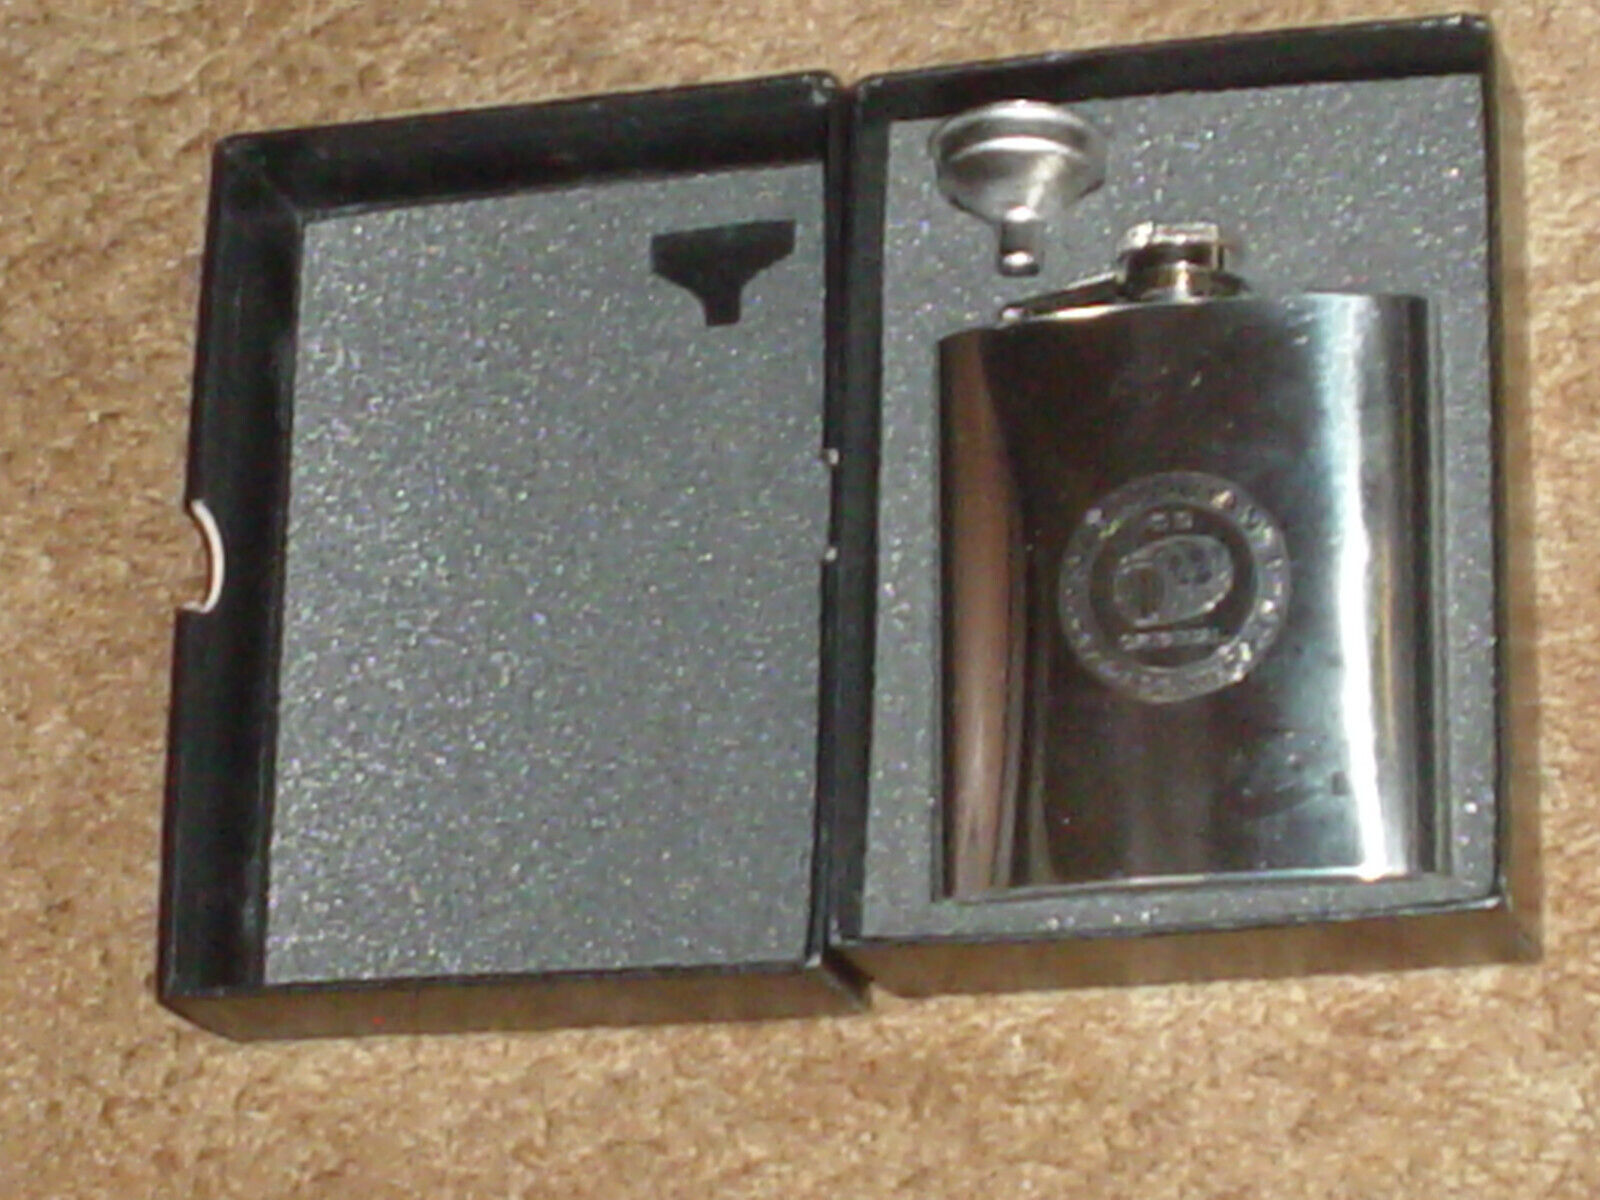 STRANAHAN\'S ORIGINAL COLORADO WHISKEY STAINLESS STEEL 8 OZ. FLASK WITH GIFT BOX